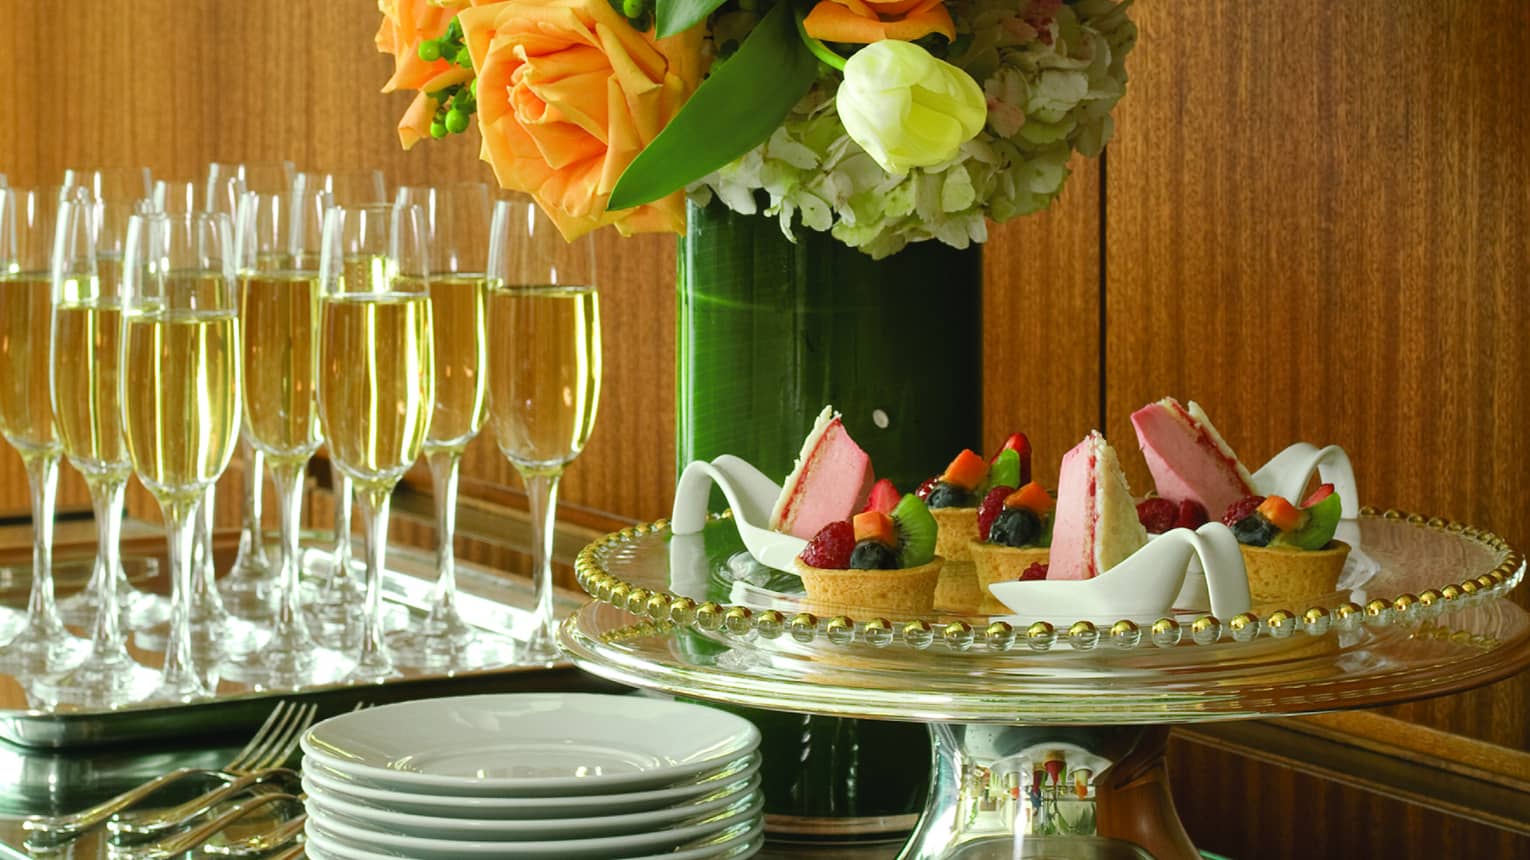 Intricate pastries, cakes and chocolates are arranged on a table next to a flower arrangement and champagne 